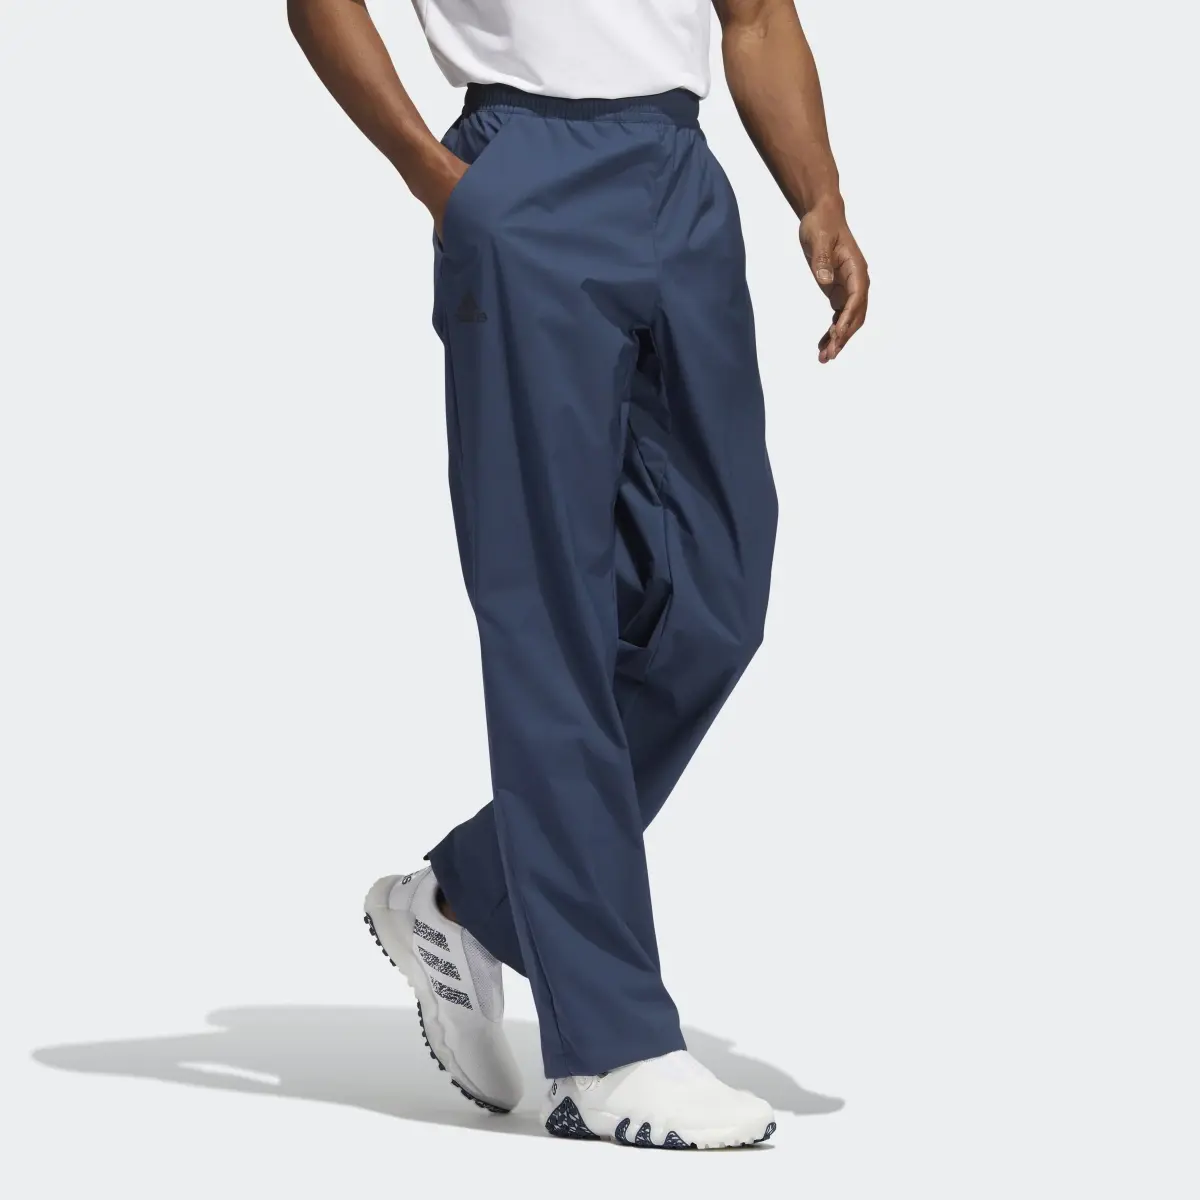 Adidas Provisional Golf Tracksuit Bottoms. 3